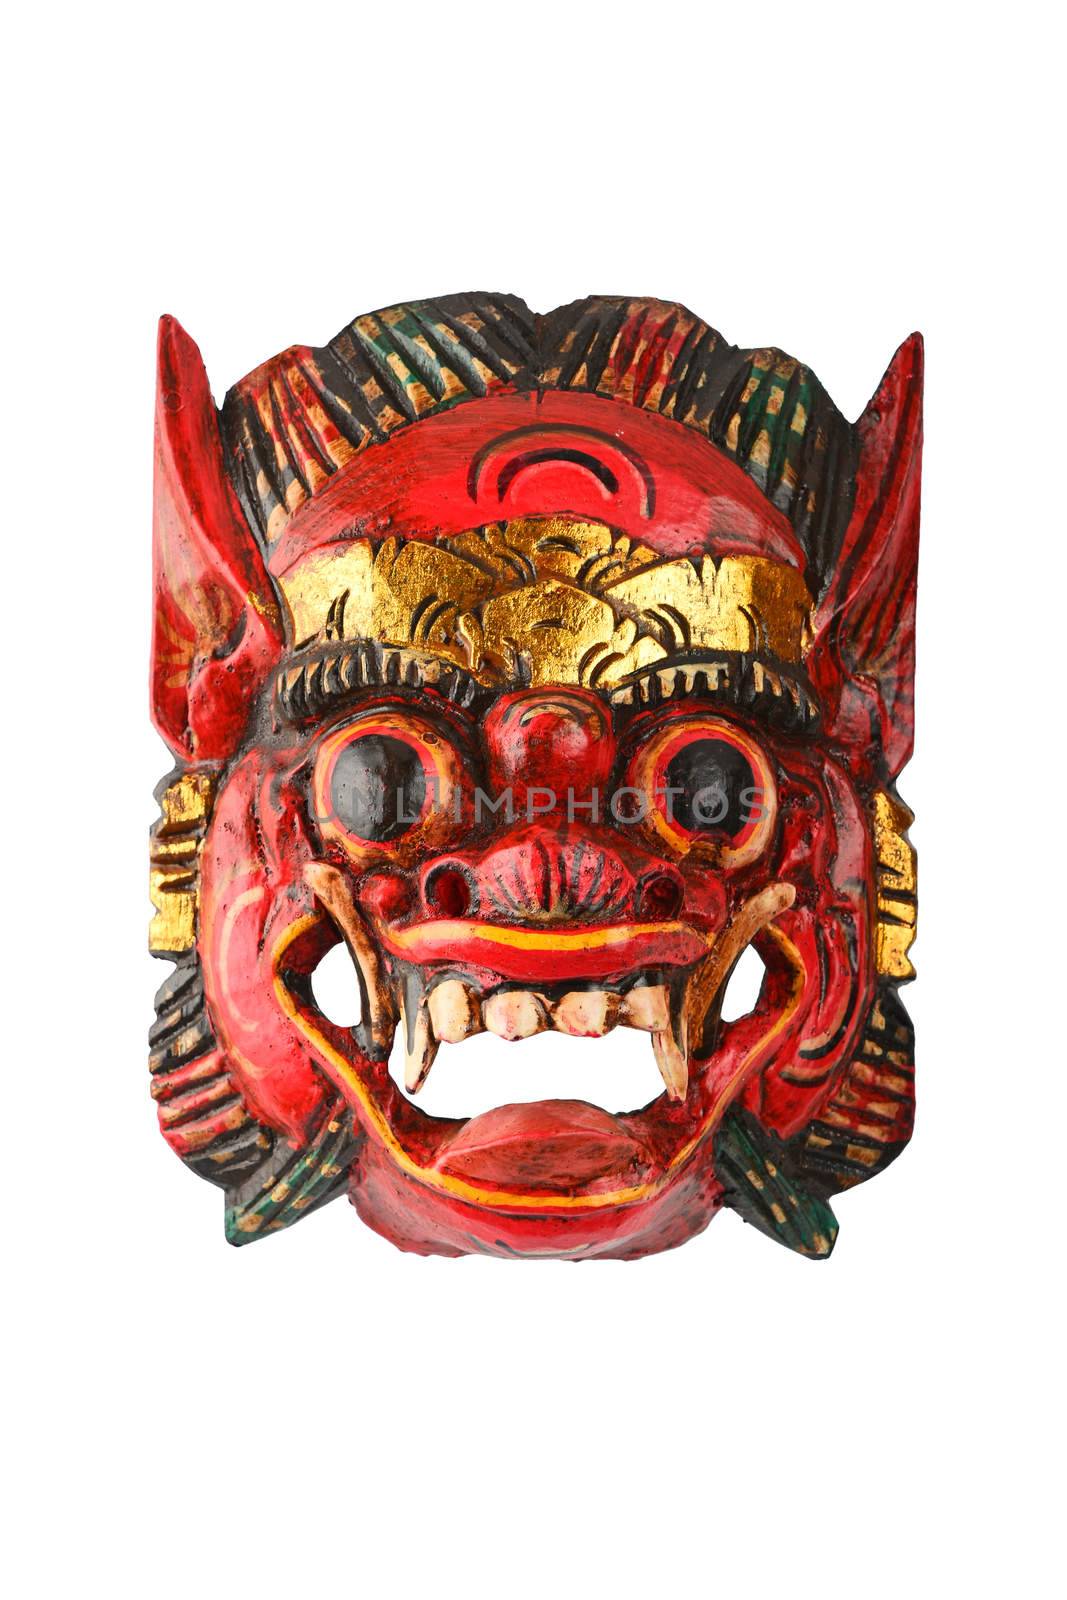 Asian traditional wooden red painted demon mask on white by BreakingTheWalls